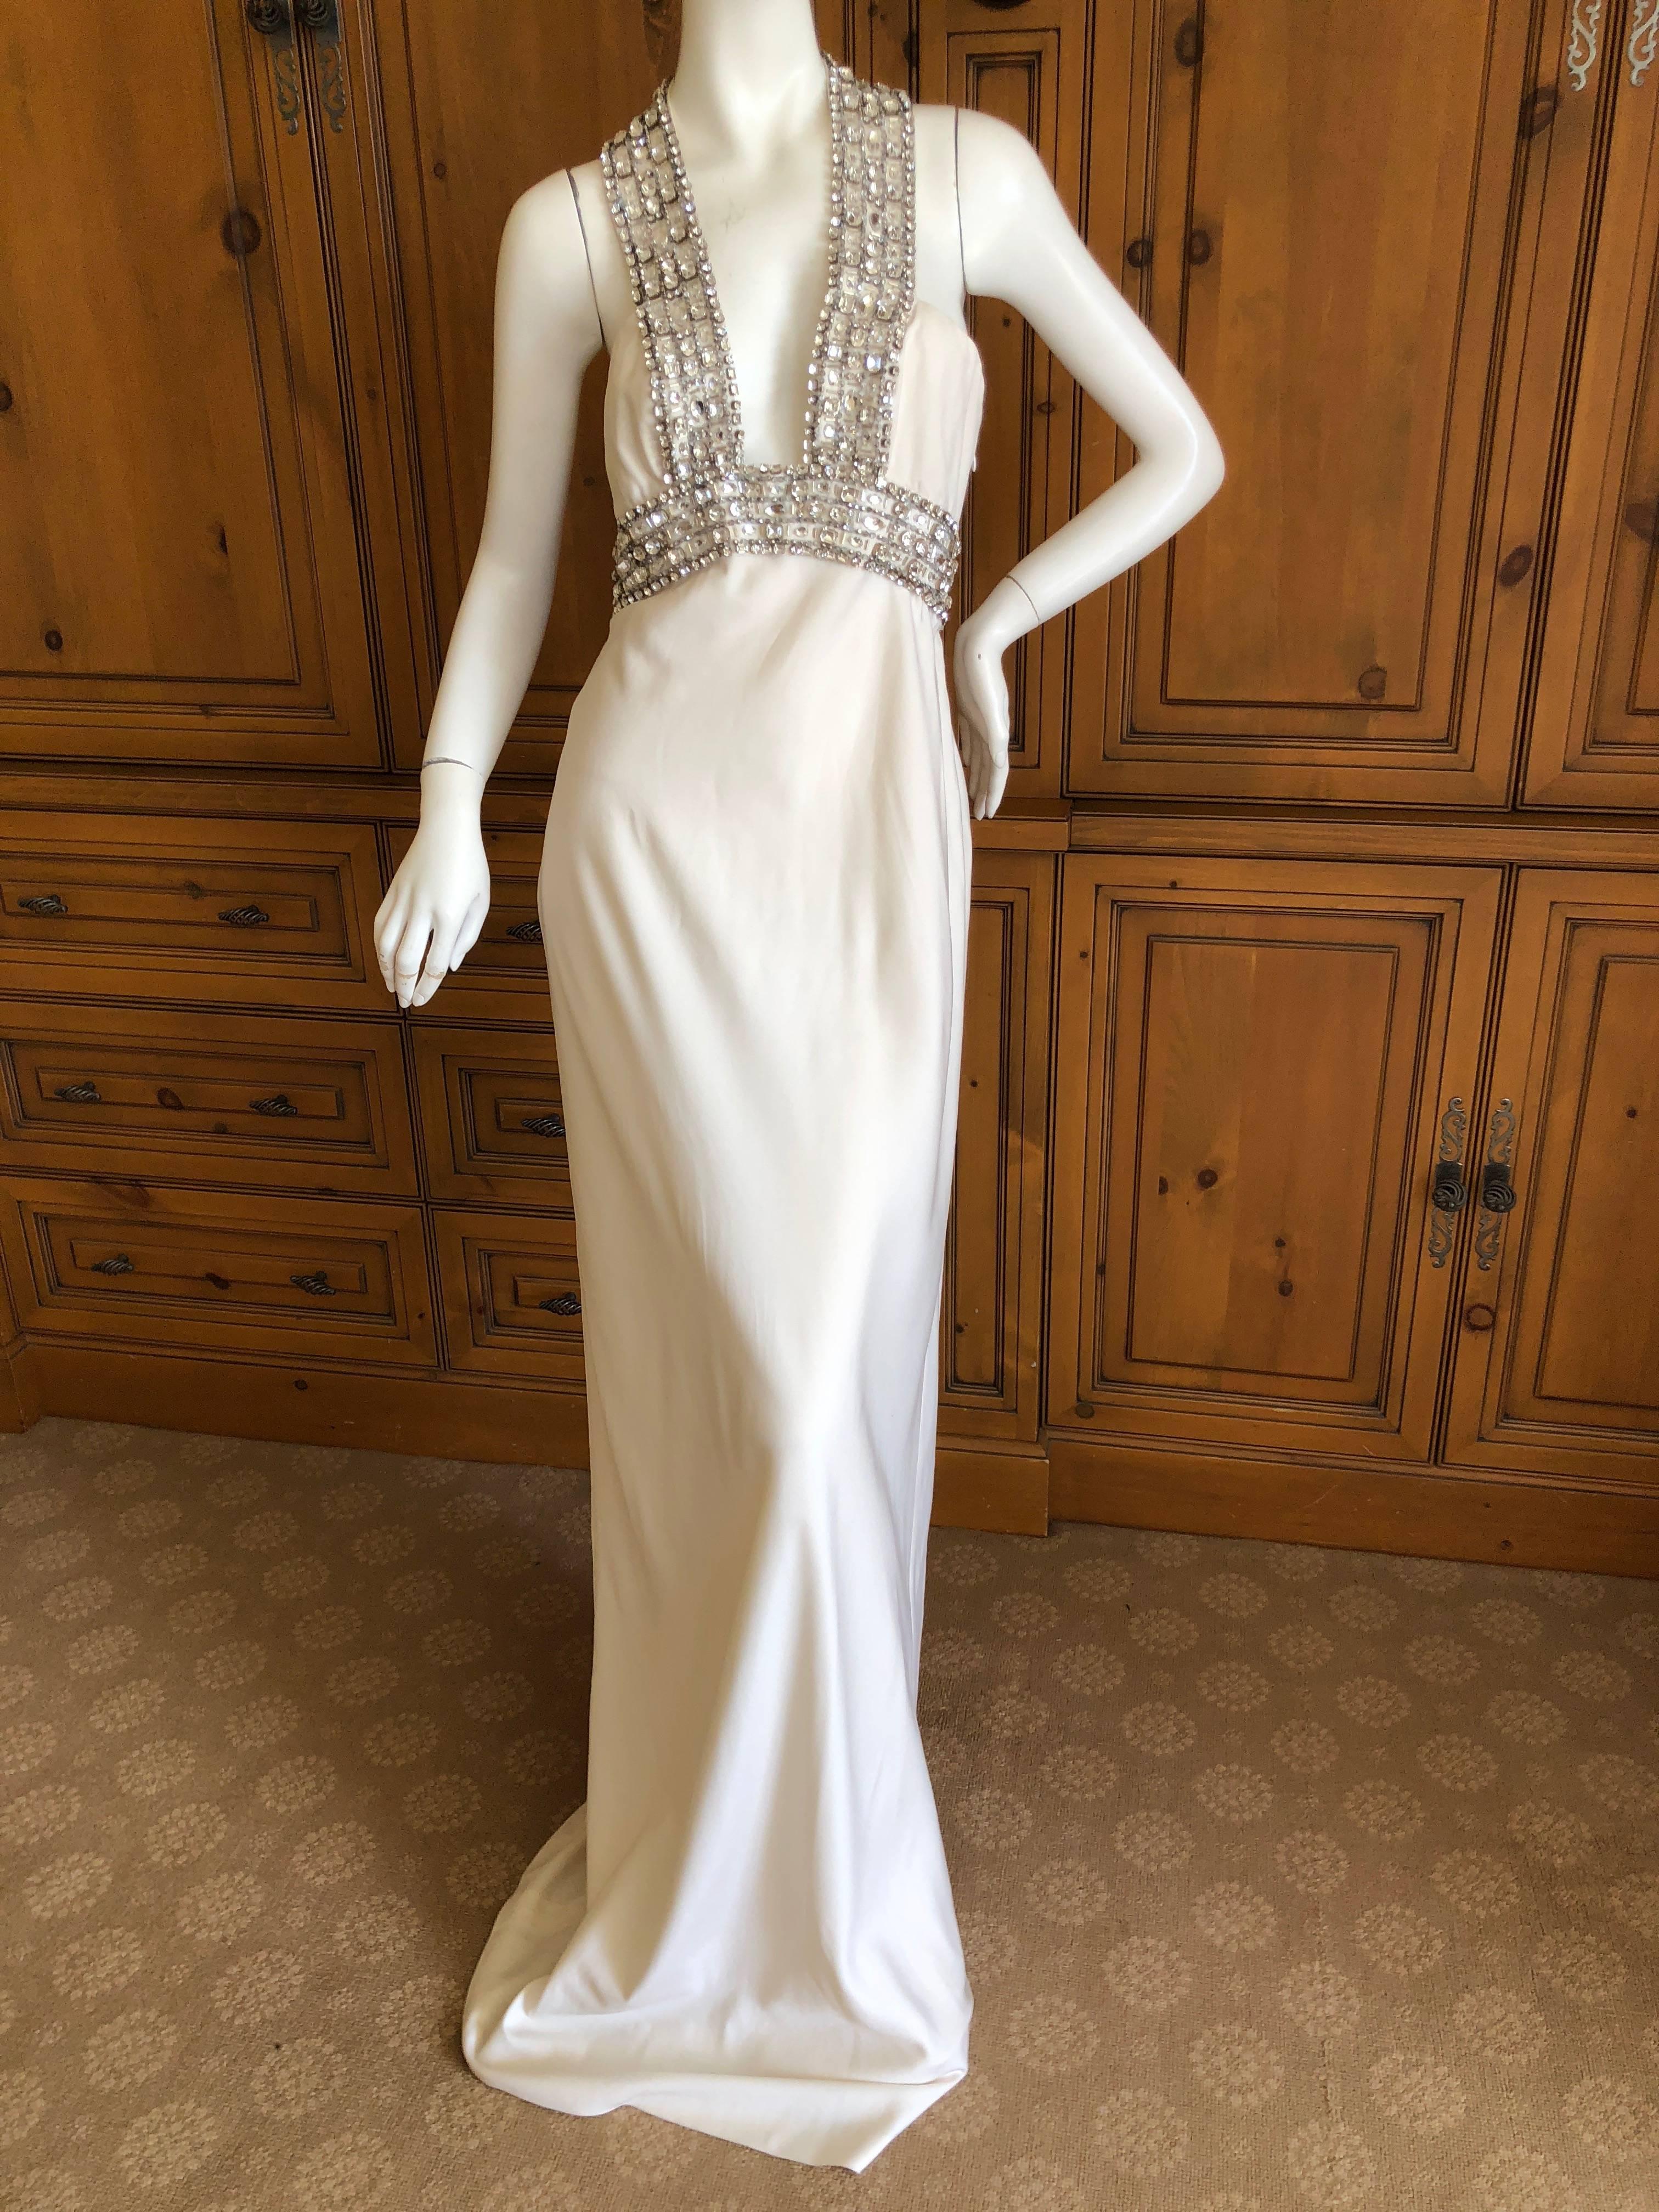 Women's Azzaro Low Cut Ivory Dress with Bold Crystal Jewel Details For Sale